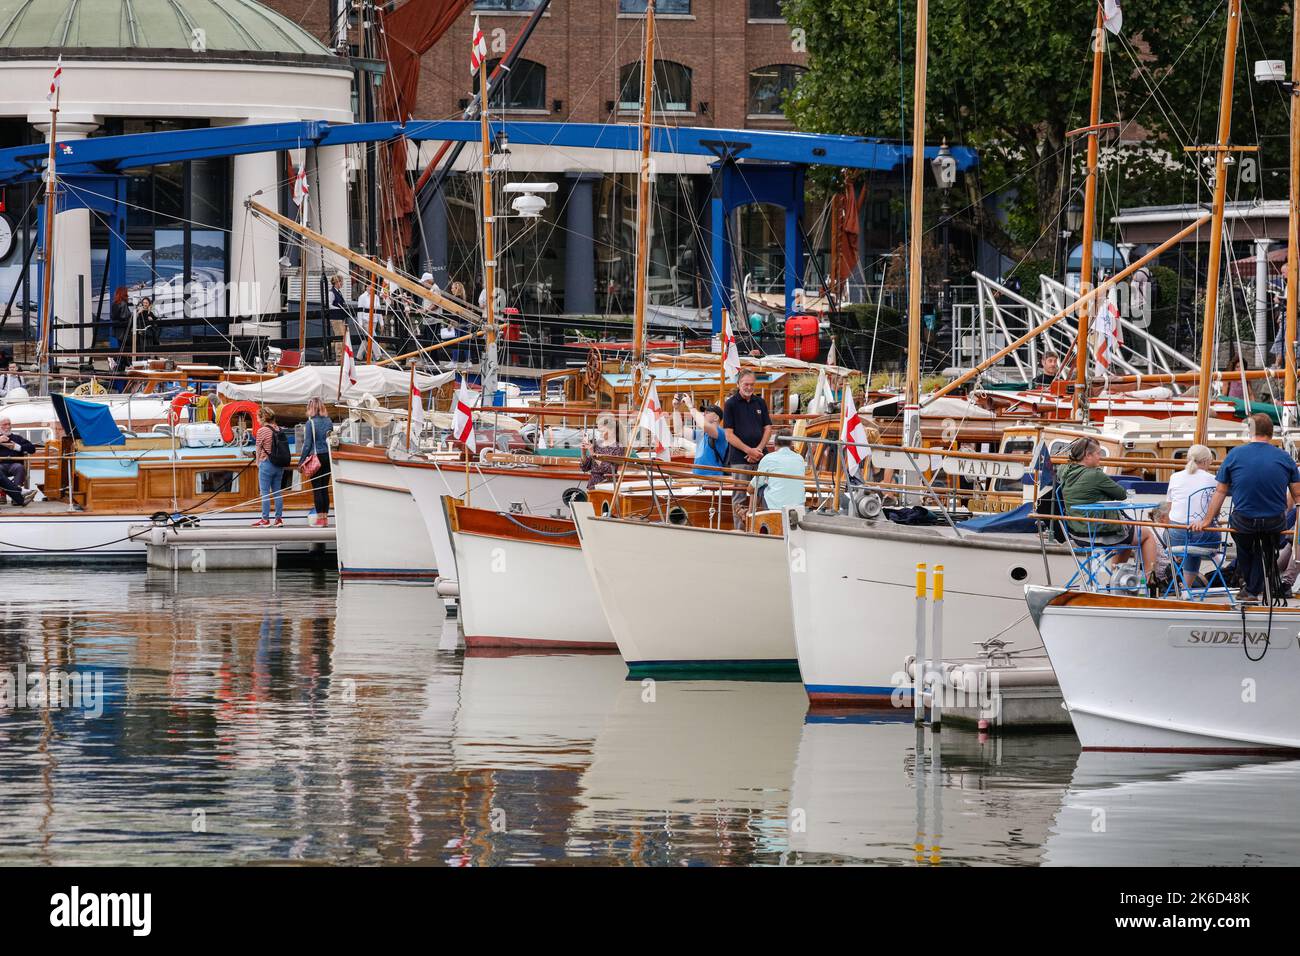 People sit on their vintage boats and yachts at St Katherine Docks Classic Boat Festival, London, England Stock Photo